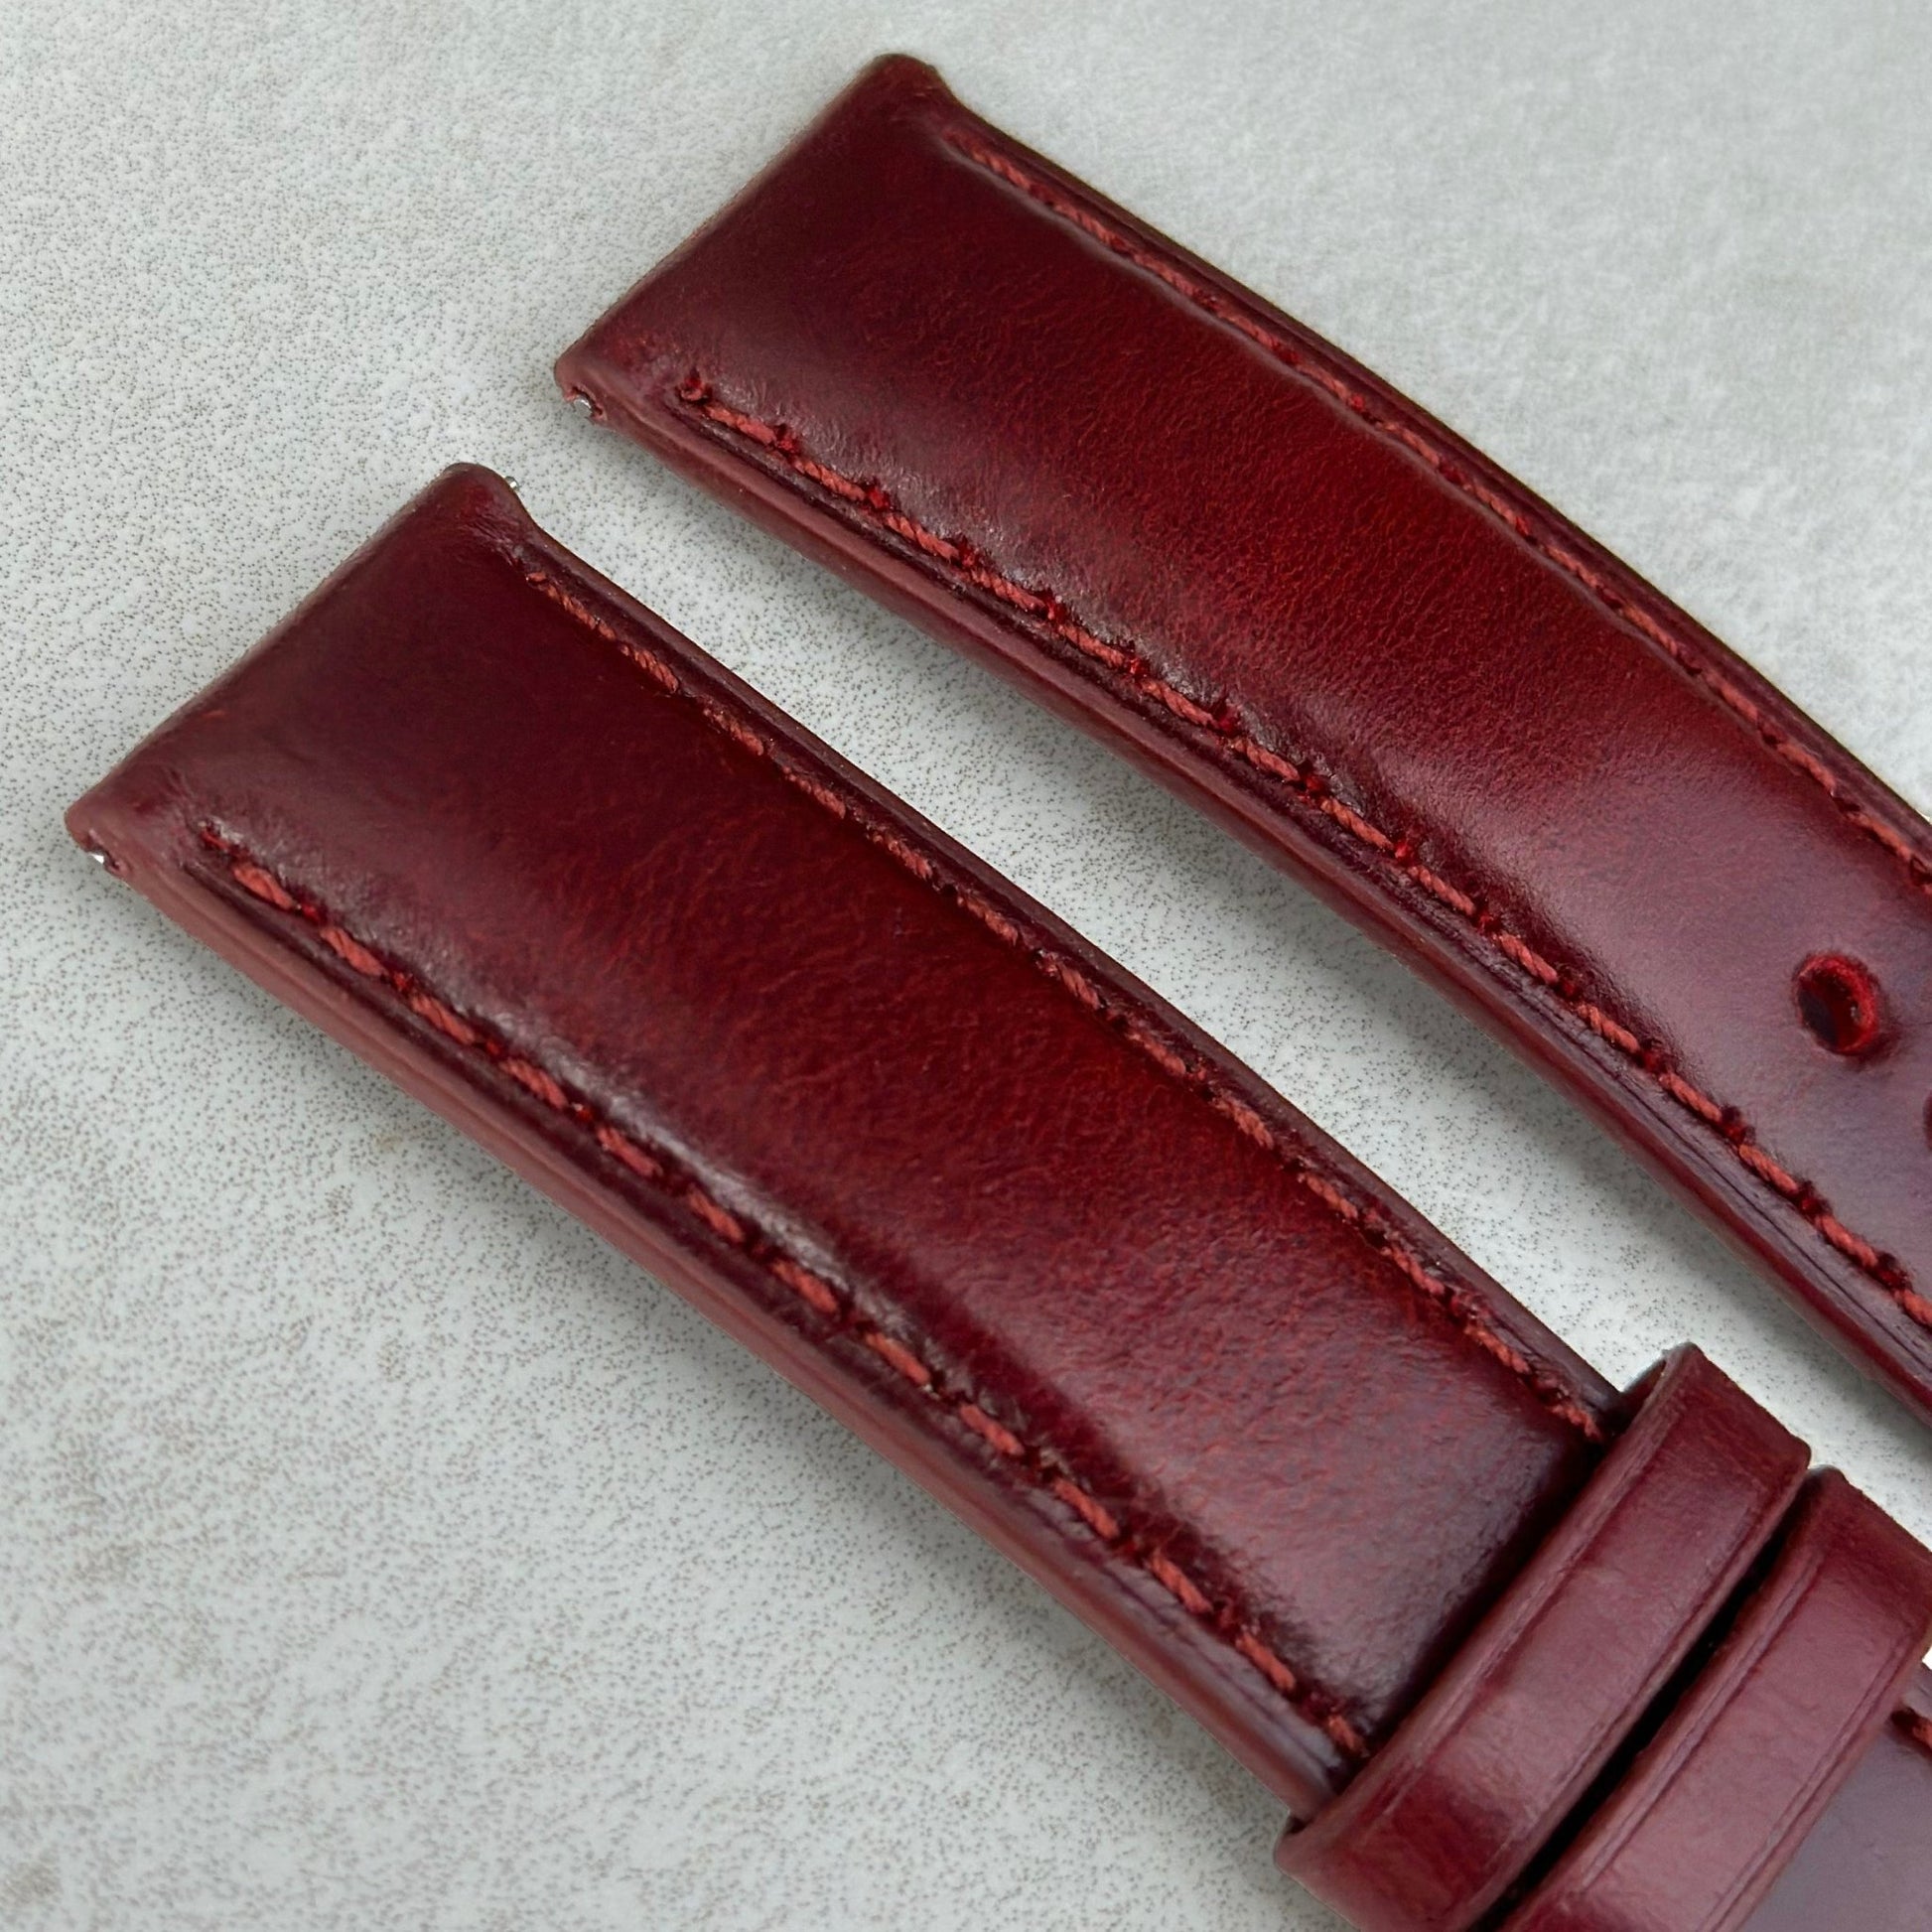 Top of the Athens wine red leather watch strap. Padded leather watch strap. Red stitching. Watch And Strap.